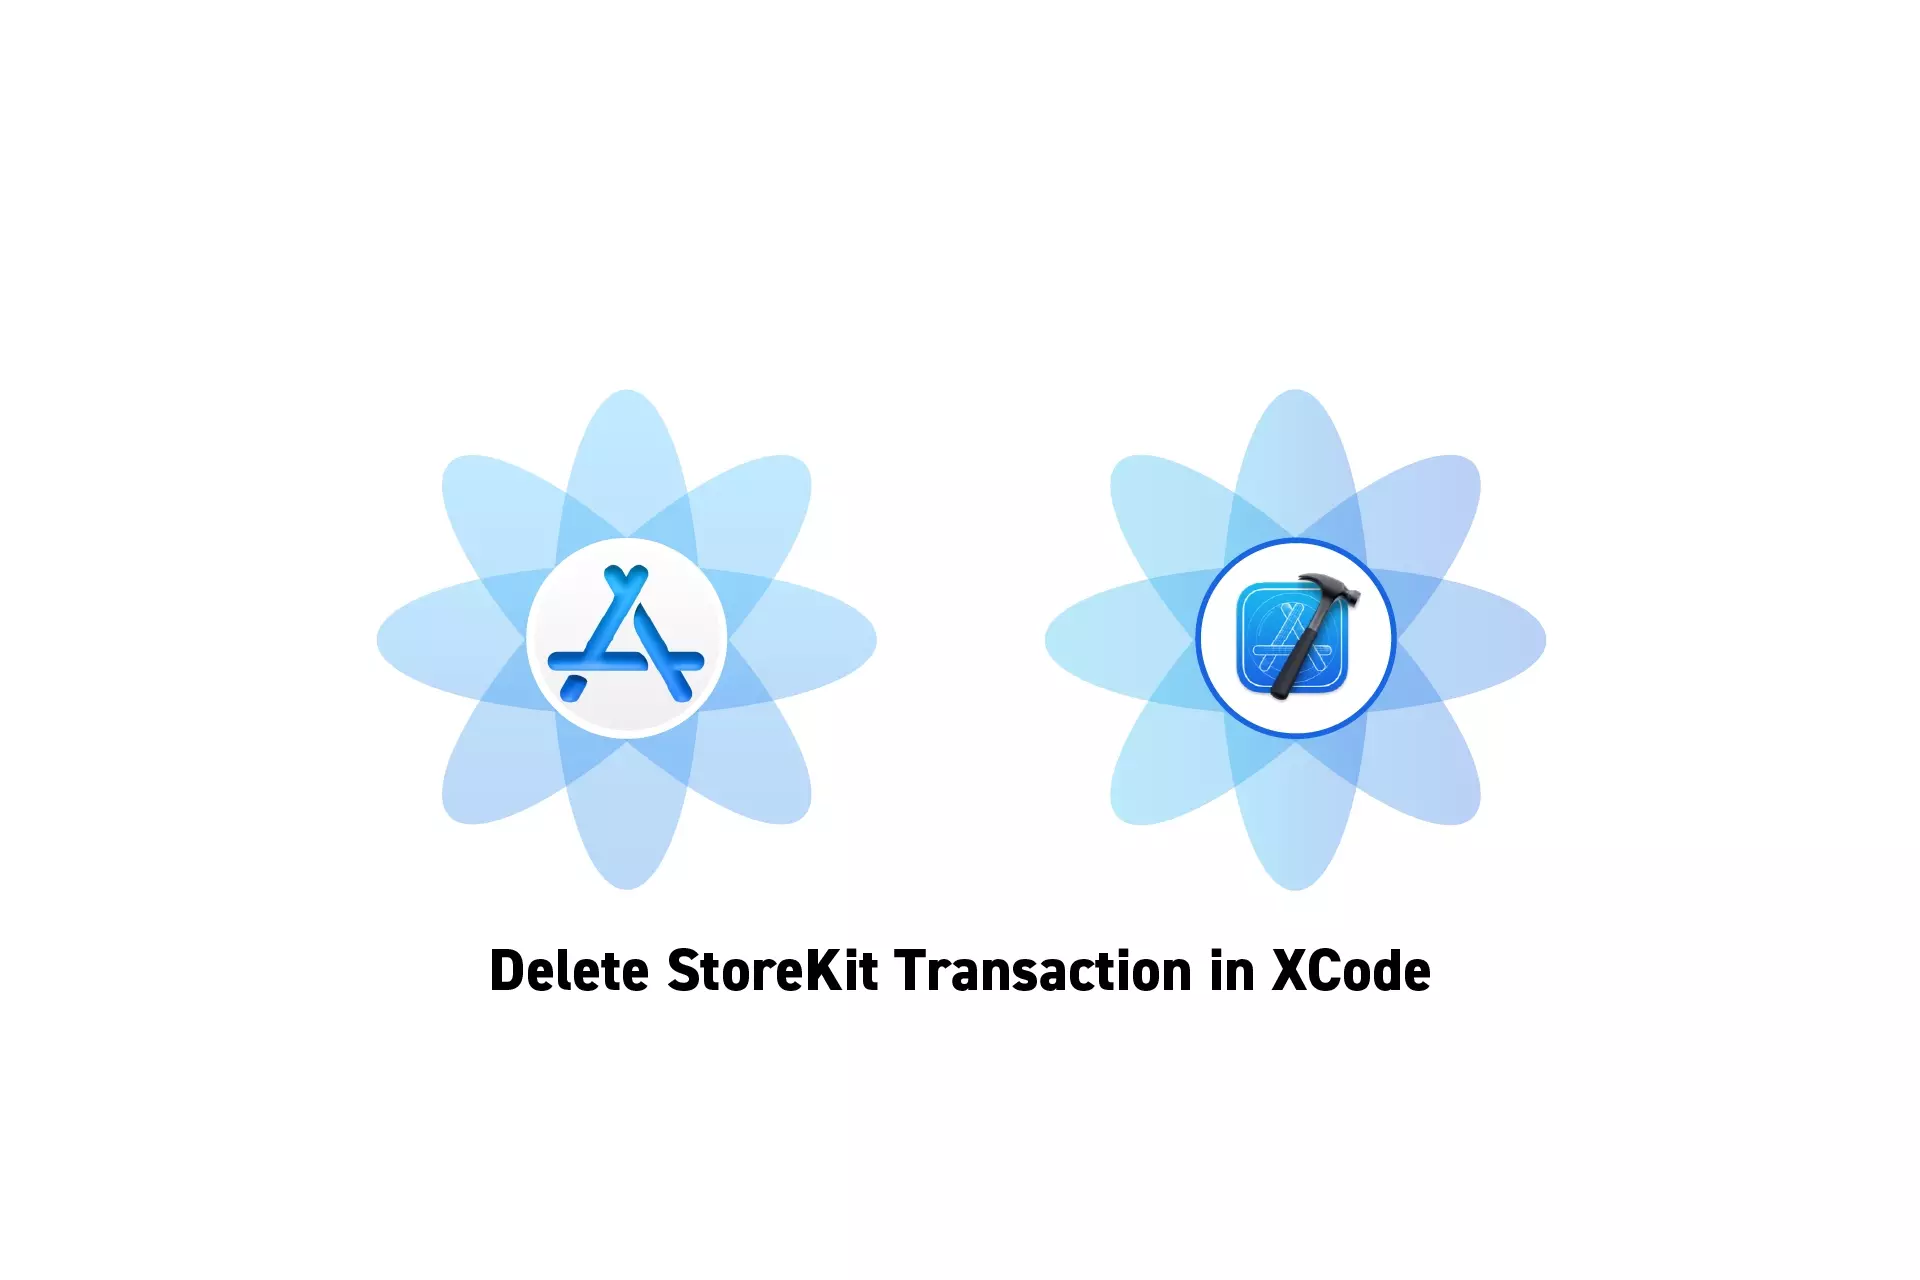 Two flowers that represent StoreKit and XCode side by side. Beneath them sits the text "Delete StoreKit Transaction in XCode."